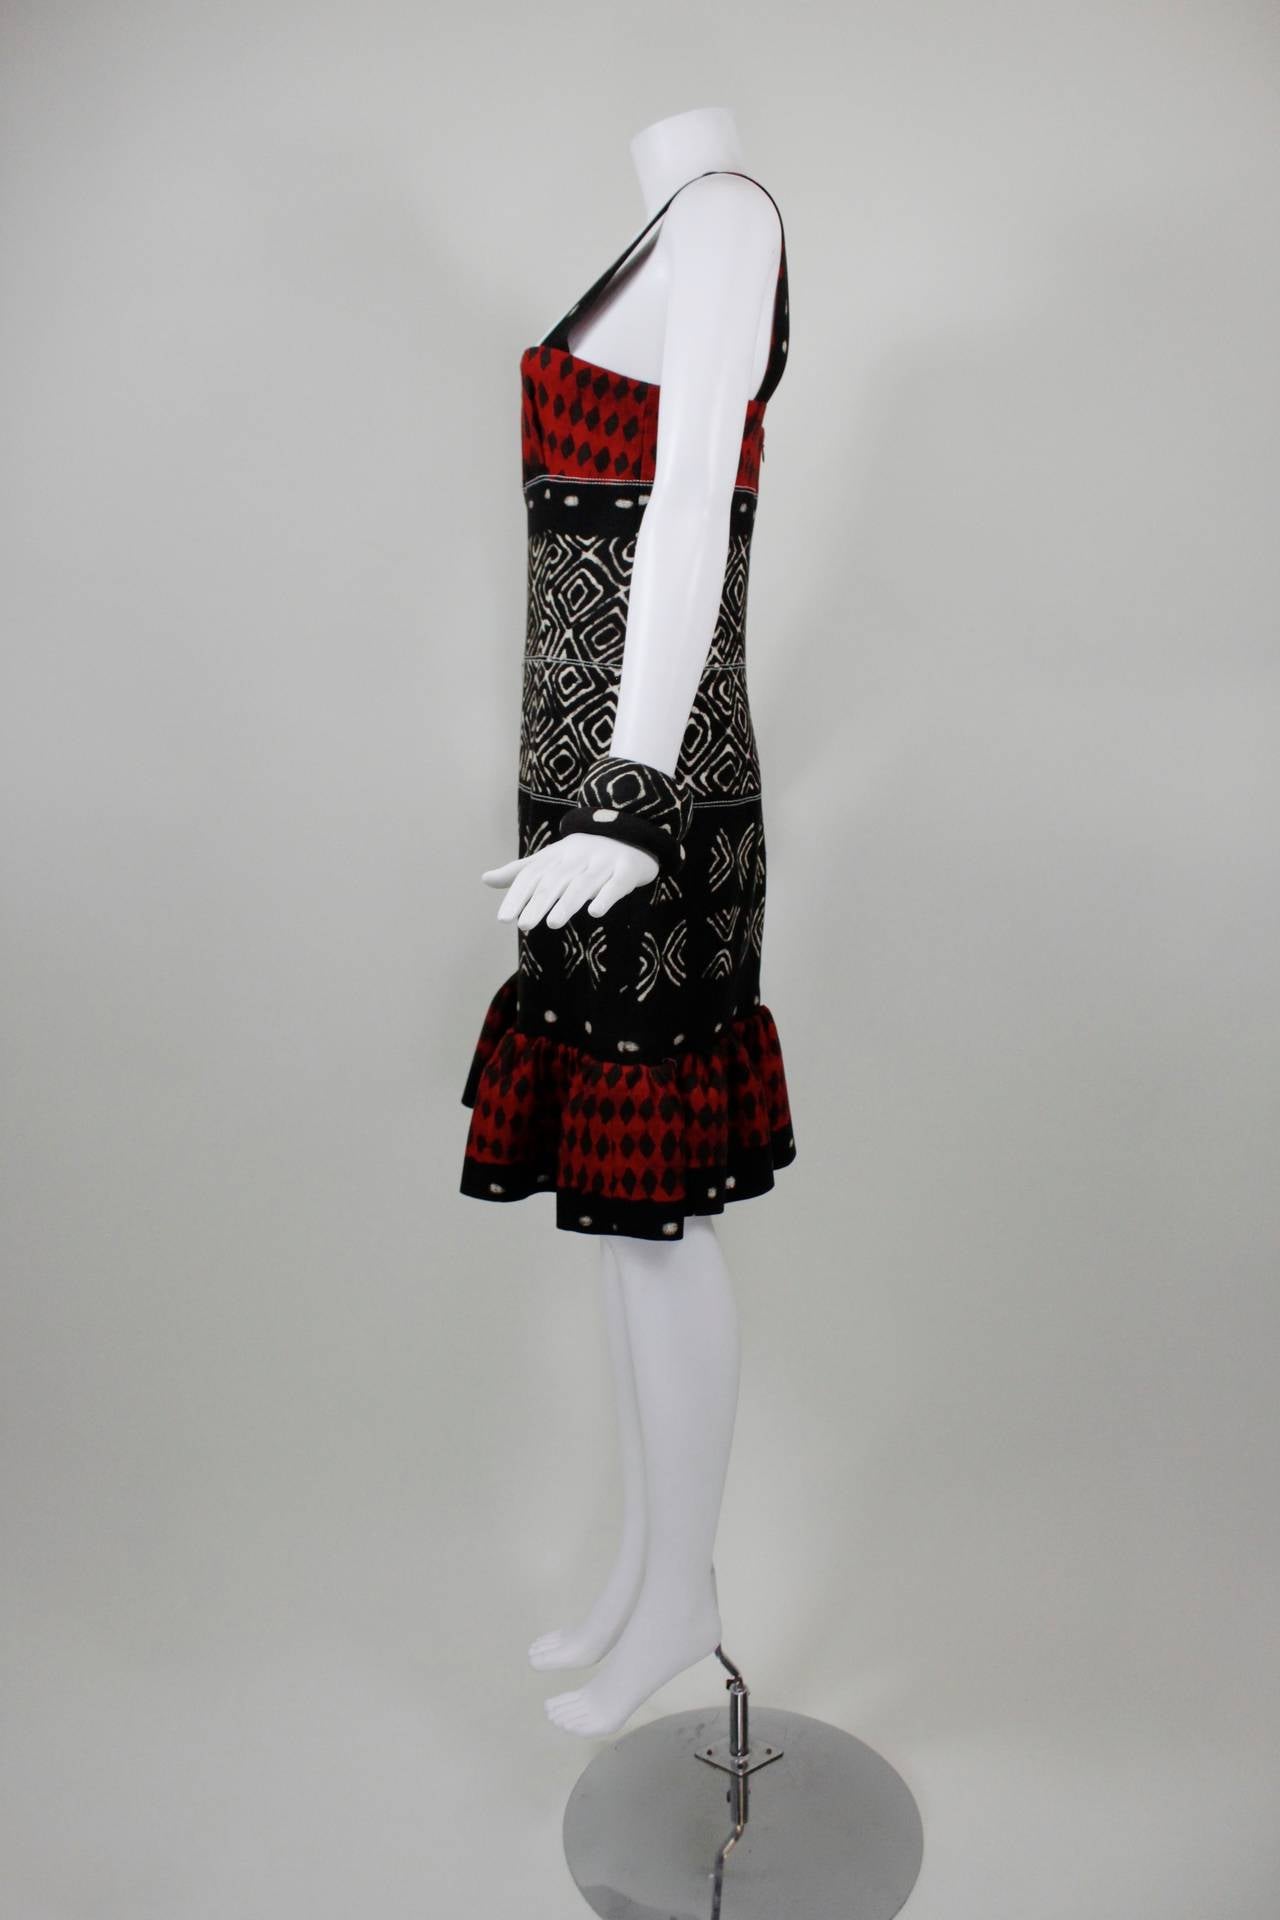 Oscar de la Renta Printed Cotton Dress with Matching Bangles In Excellent Condition For Sale In Los Angeles, CA